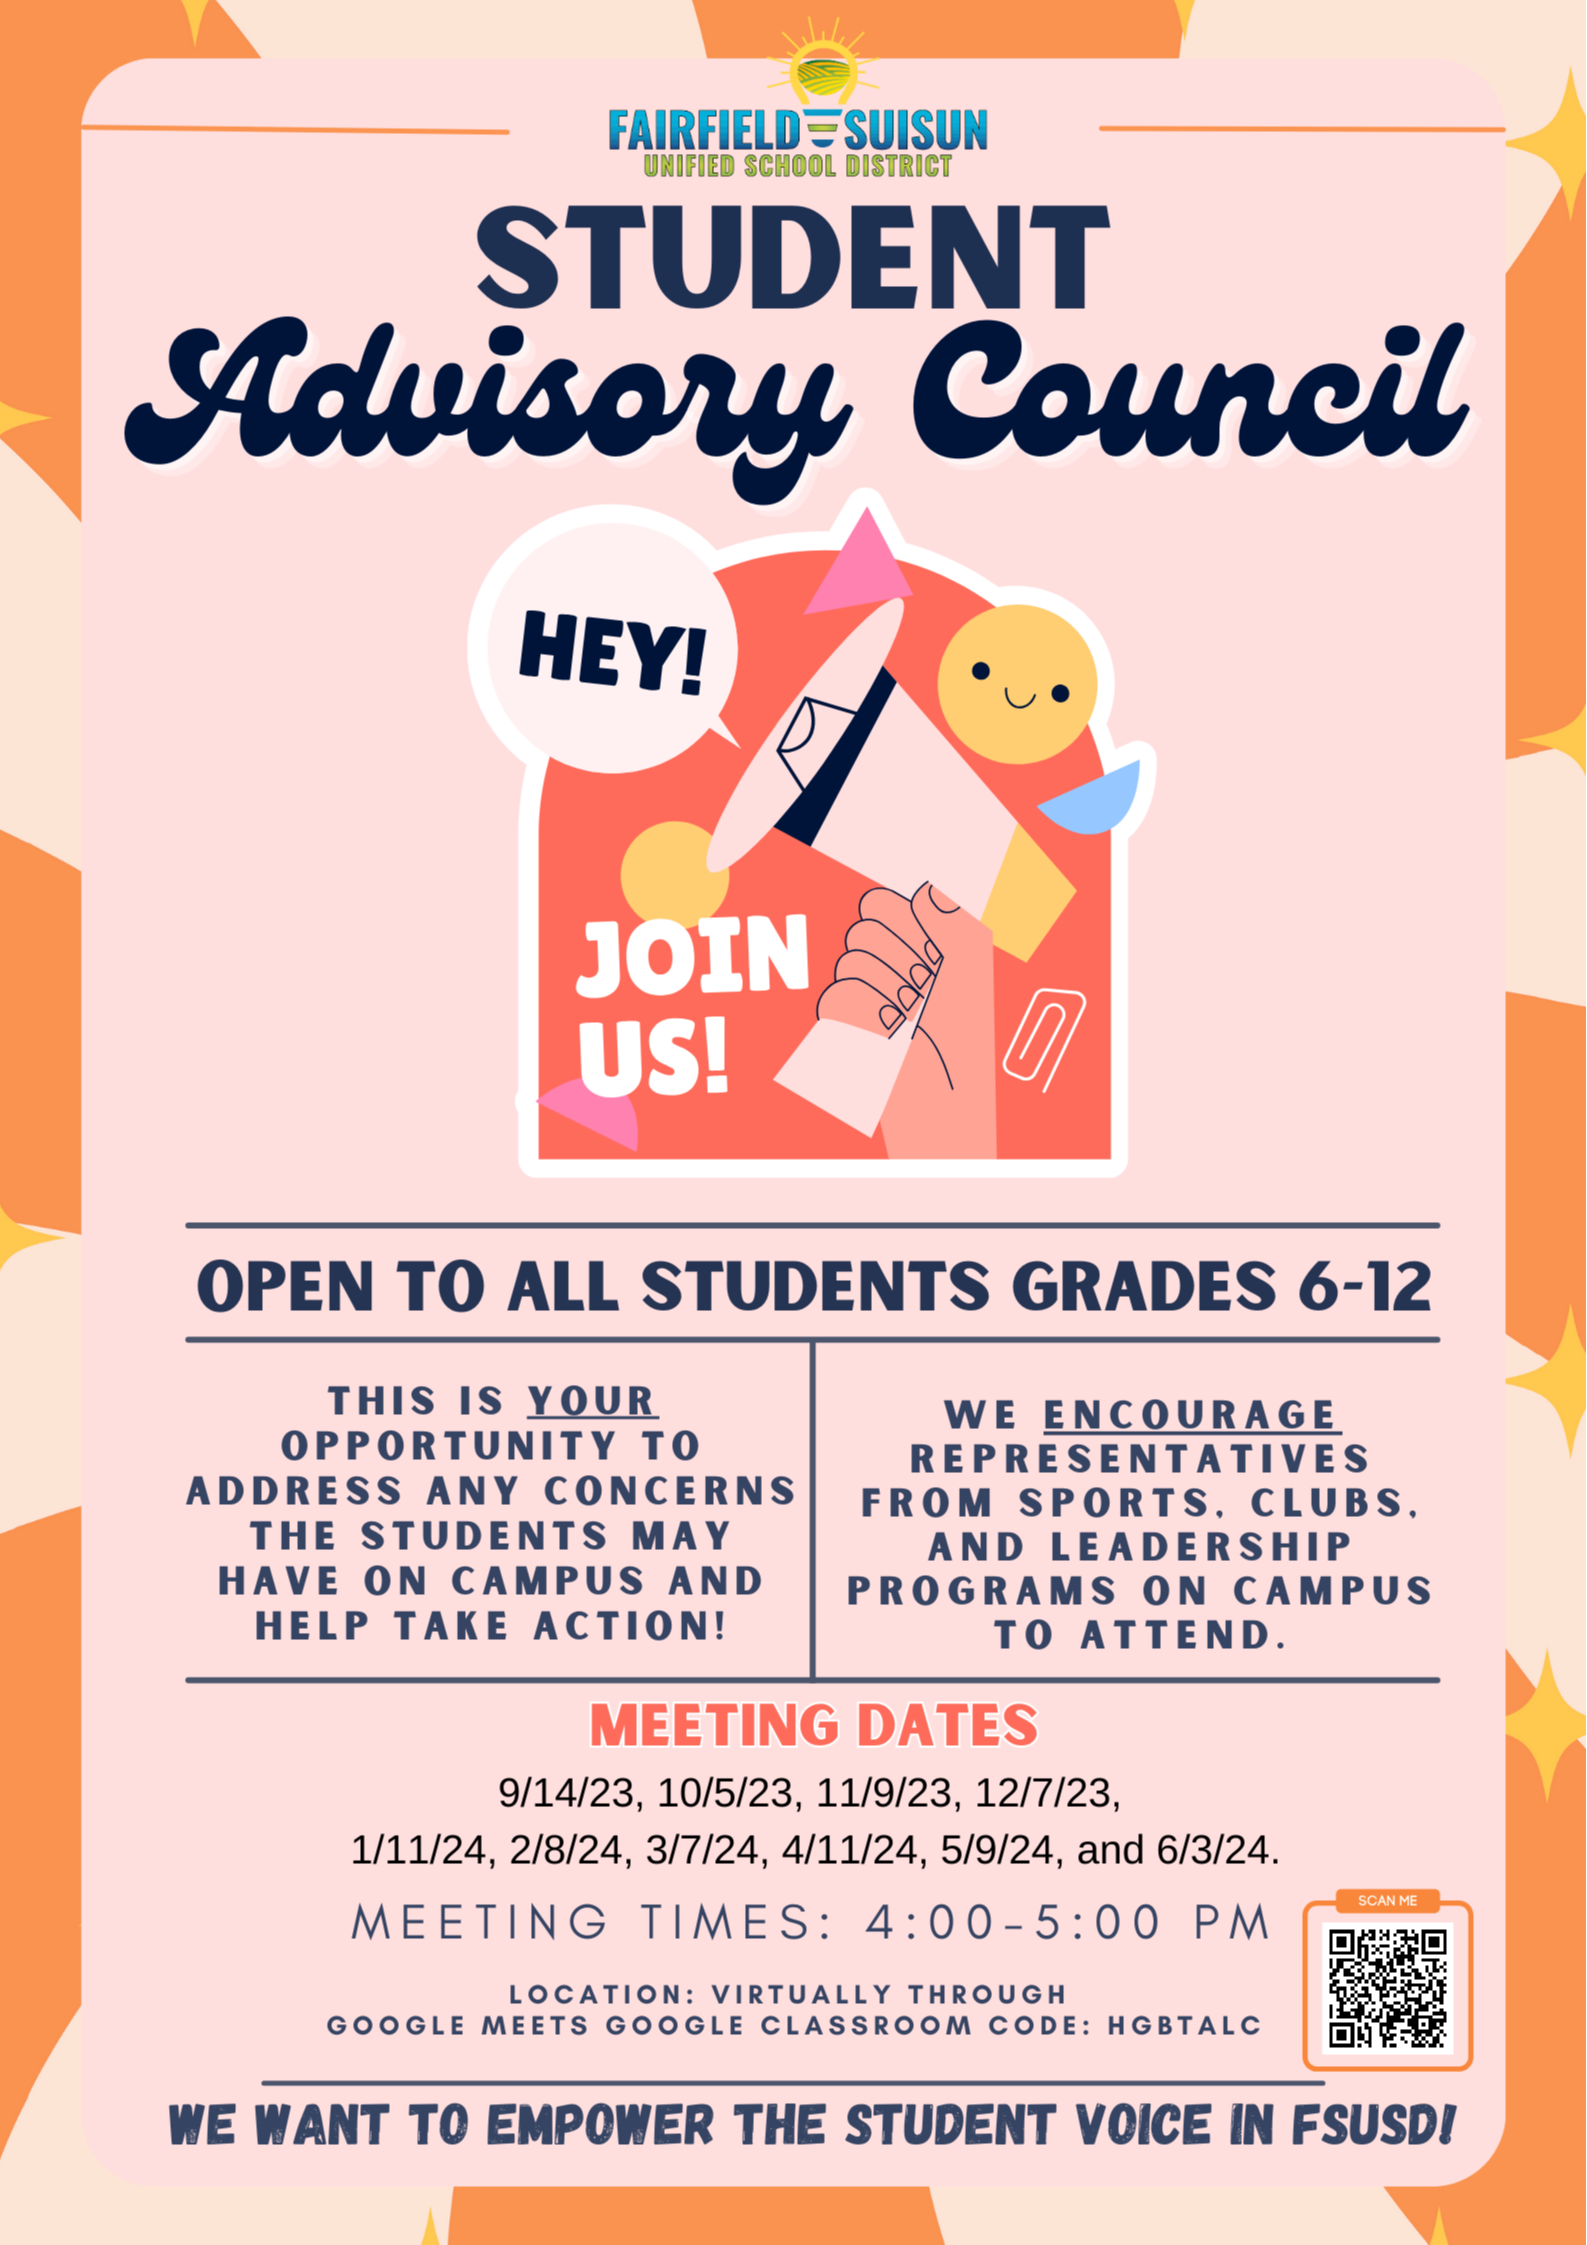 Student Advisory Council - Open to all students grades 6-12 - This is your opportunity to address any concerns the students may have one campus and help take action!